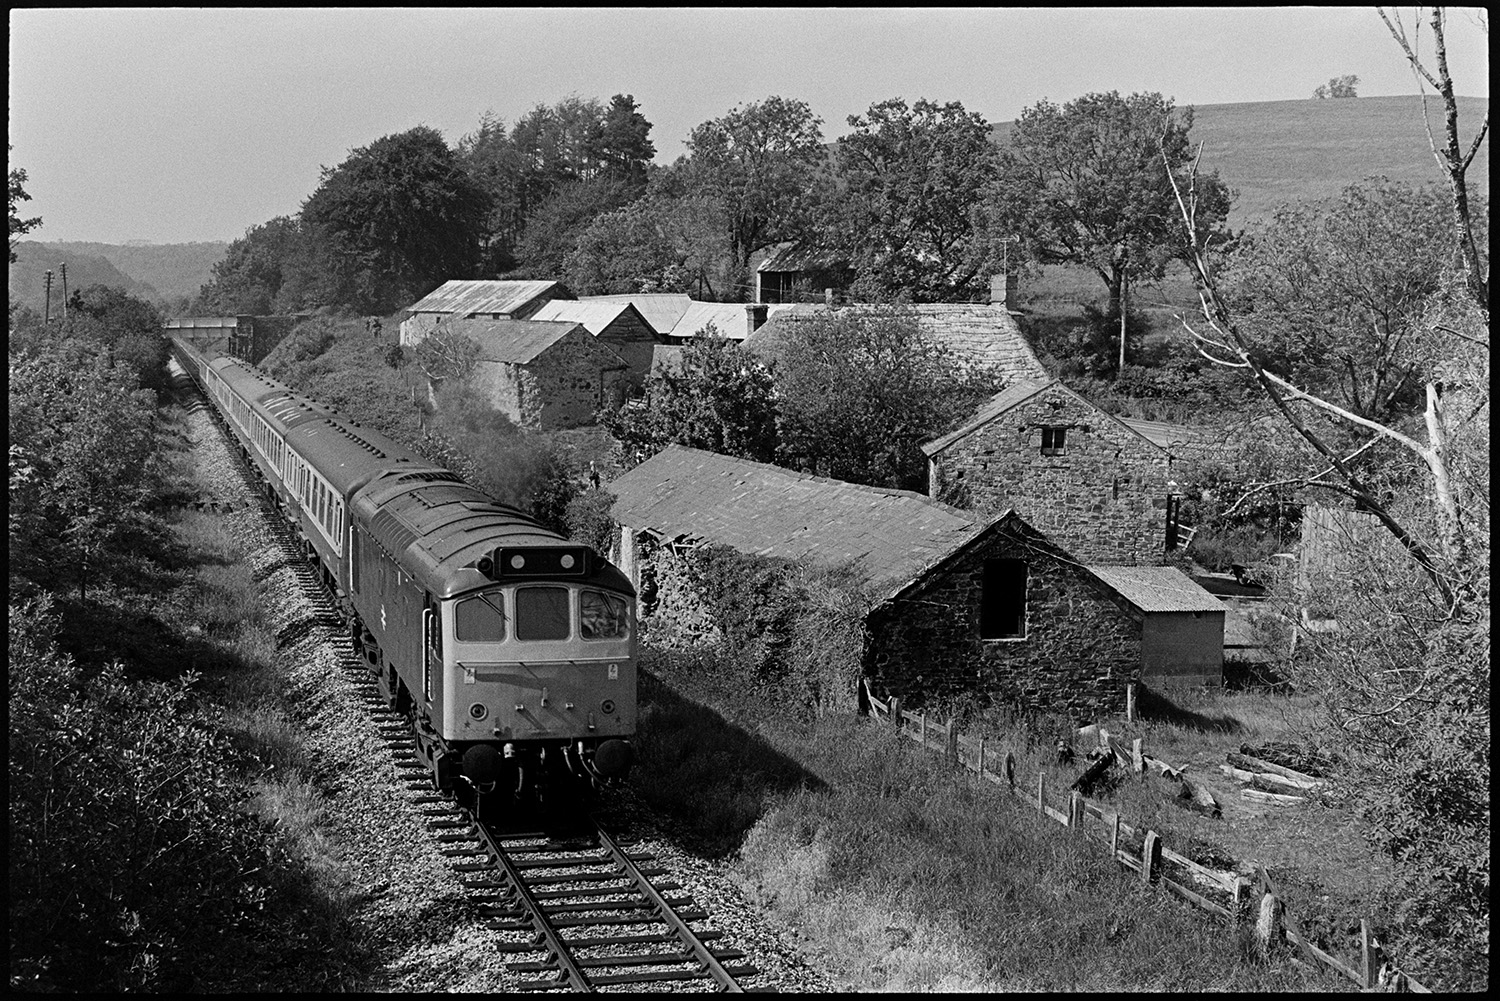 Diesel train on branch line, viewed from above. 
[A diesel train on a branch railway line near Leigh Cross, Chulmleigh. The train is passing a farm.]